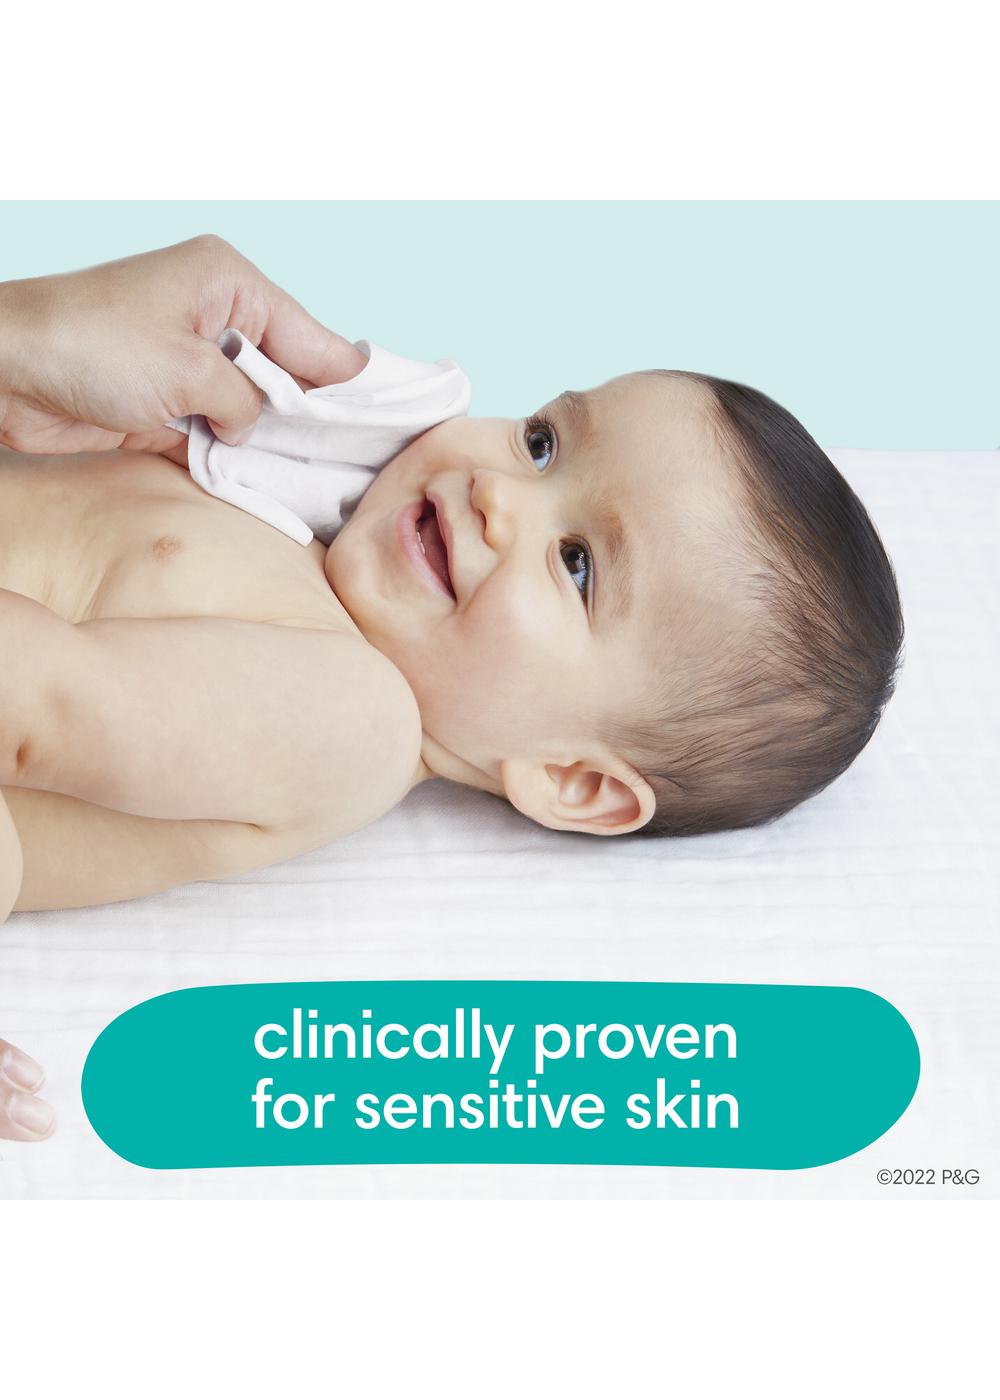 Pampers Sensitive Skin & Fragrance Free Baby Wipes 12 Pk; image 9 of 10